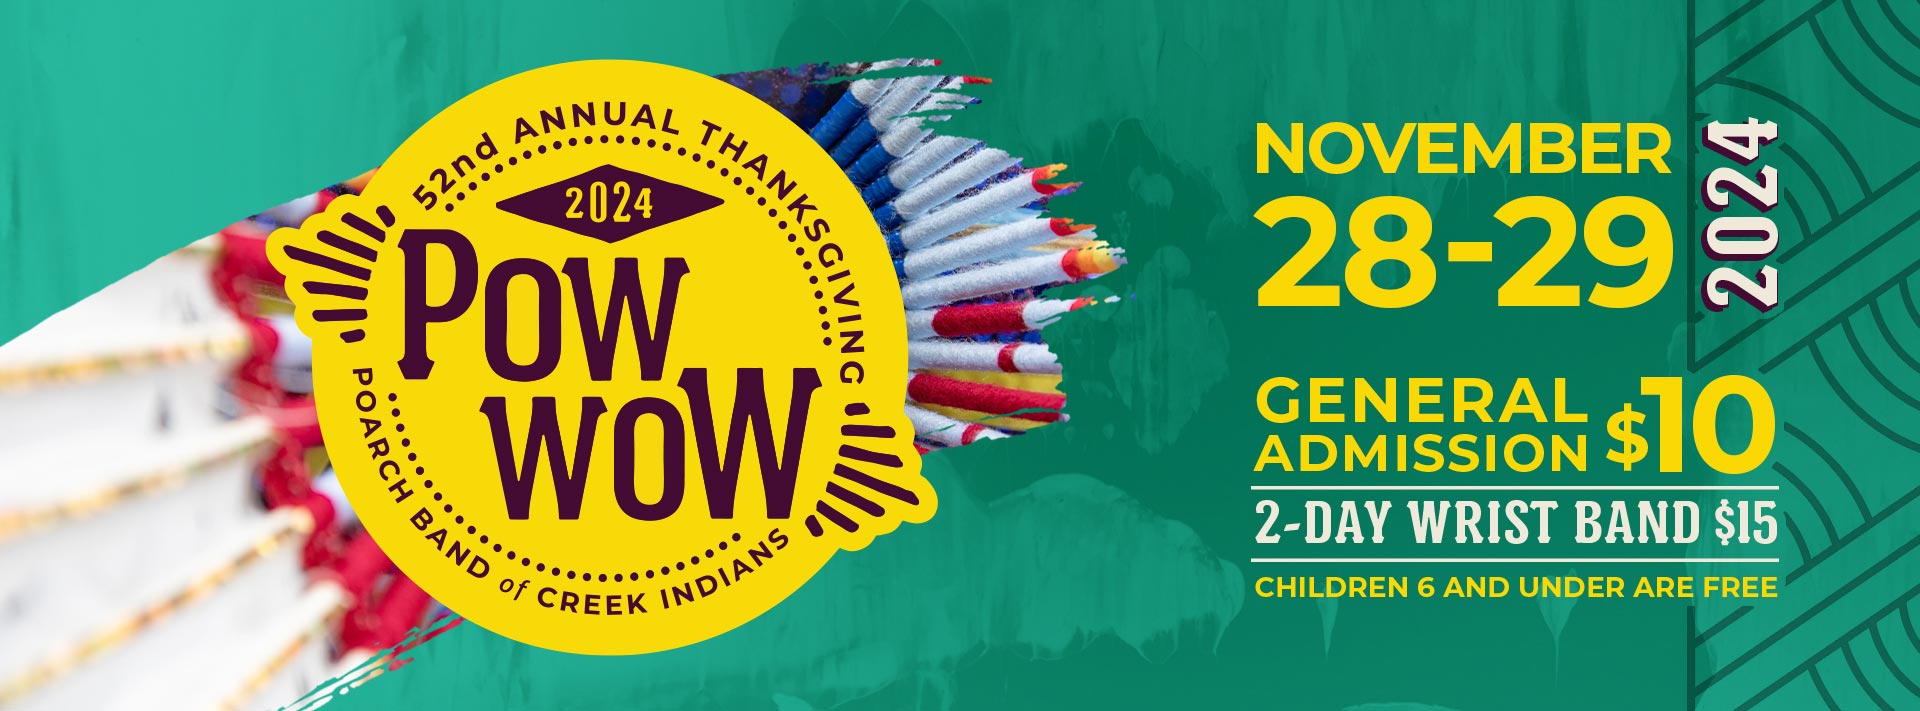 52nd Annual Thanksgiving - 2024 Pow Wow - Poarch Band of Creek Indians - November 28-29 2024 - General Admission $10 - 2-day wrist band $15 - Children 6 and under are free